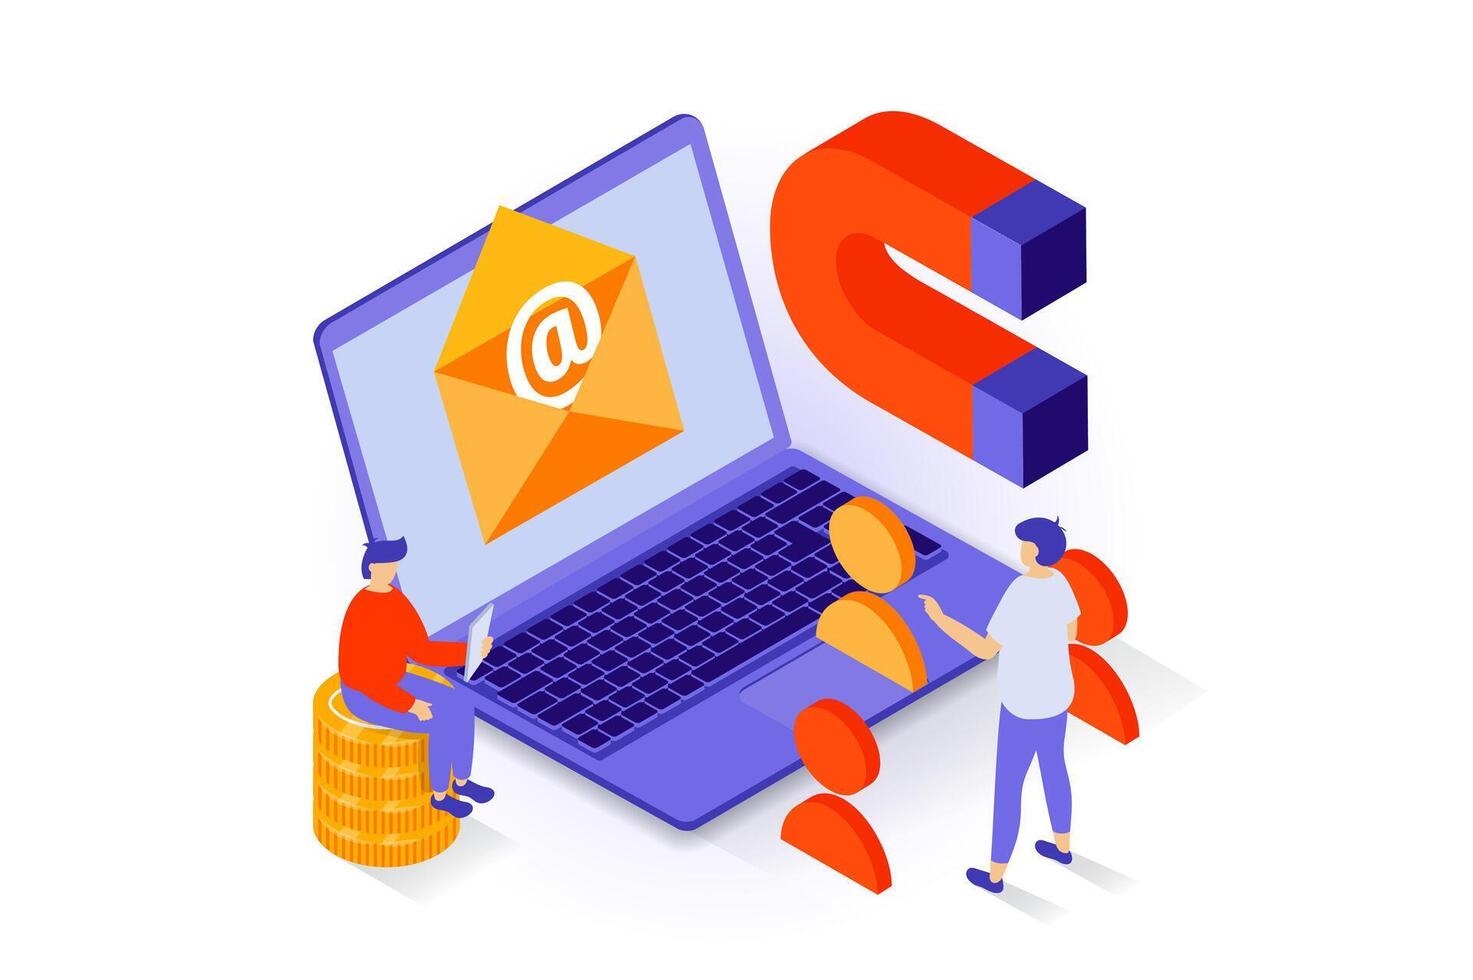 Business and marketing concept in 3d isometric design. People working and developing company, making email promotion, attracting new customers. Vector illustration with isometry scene for web graphic